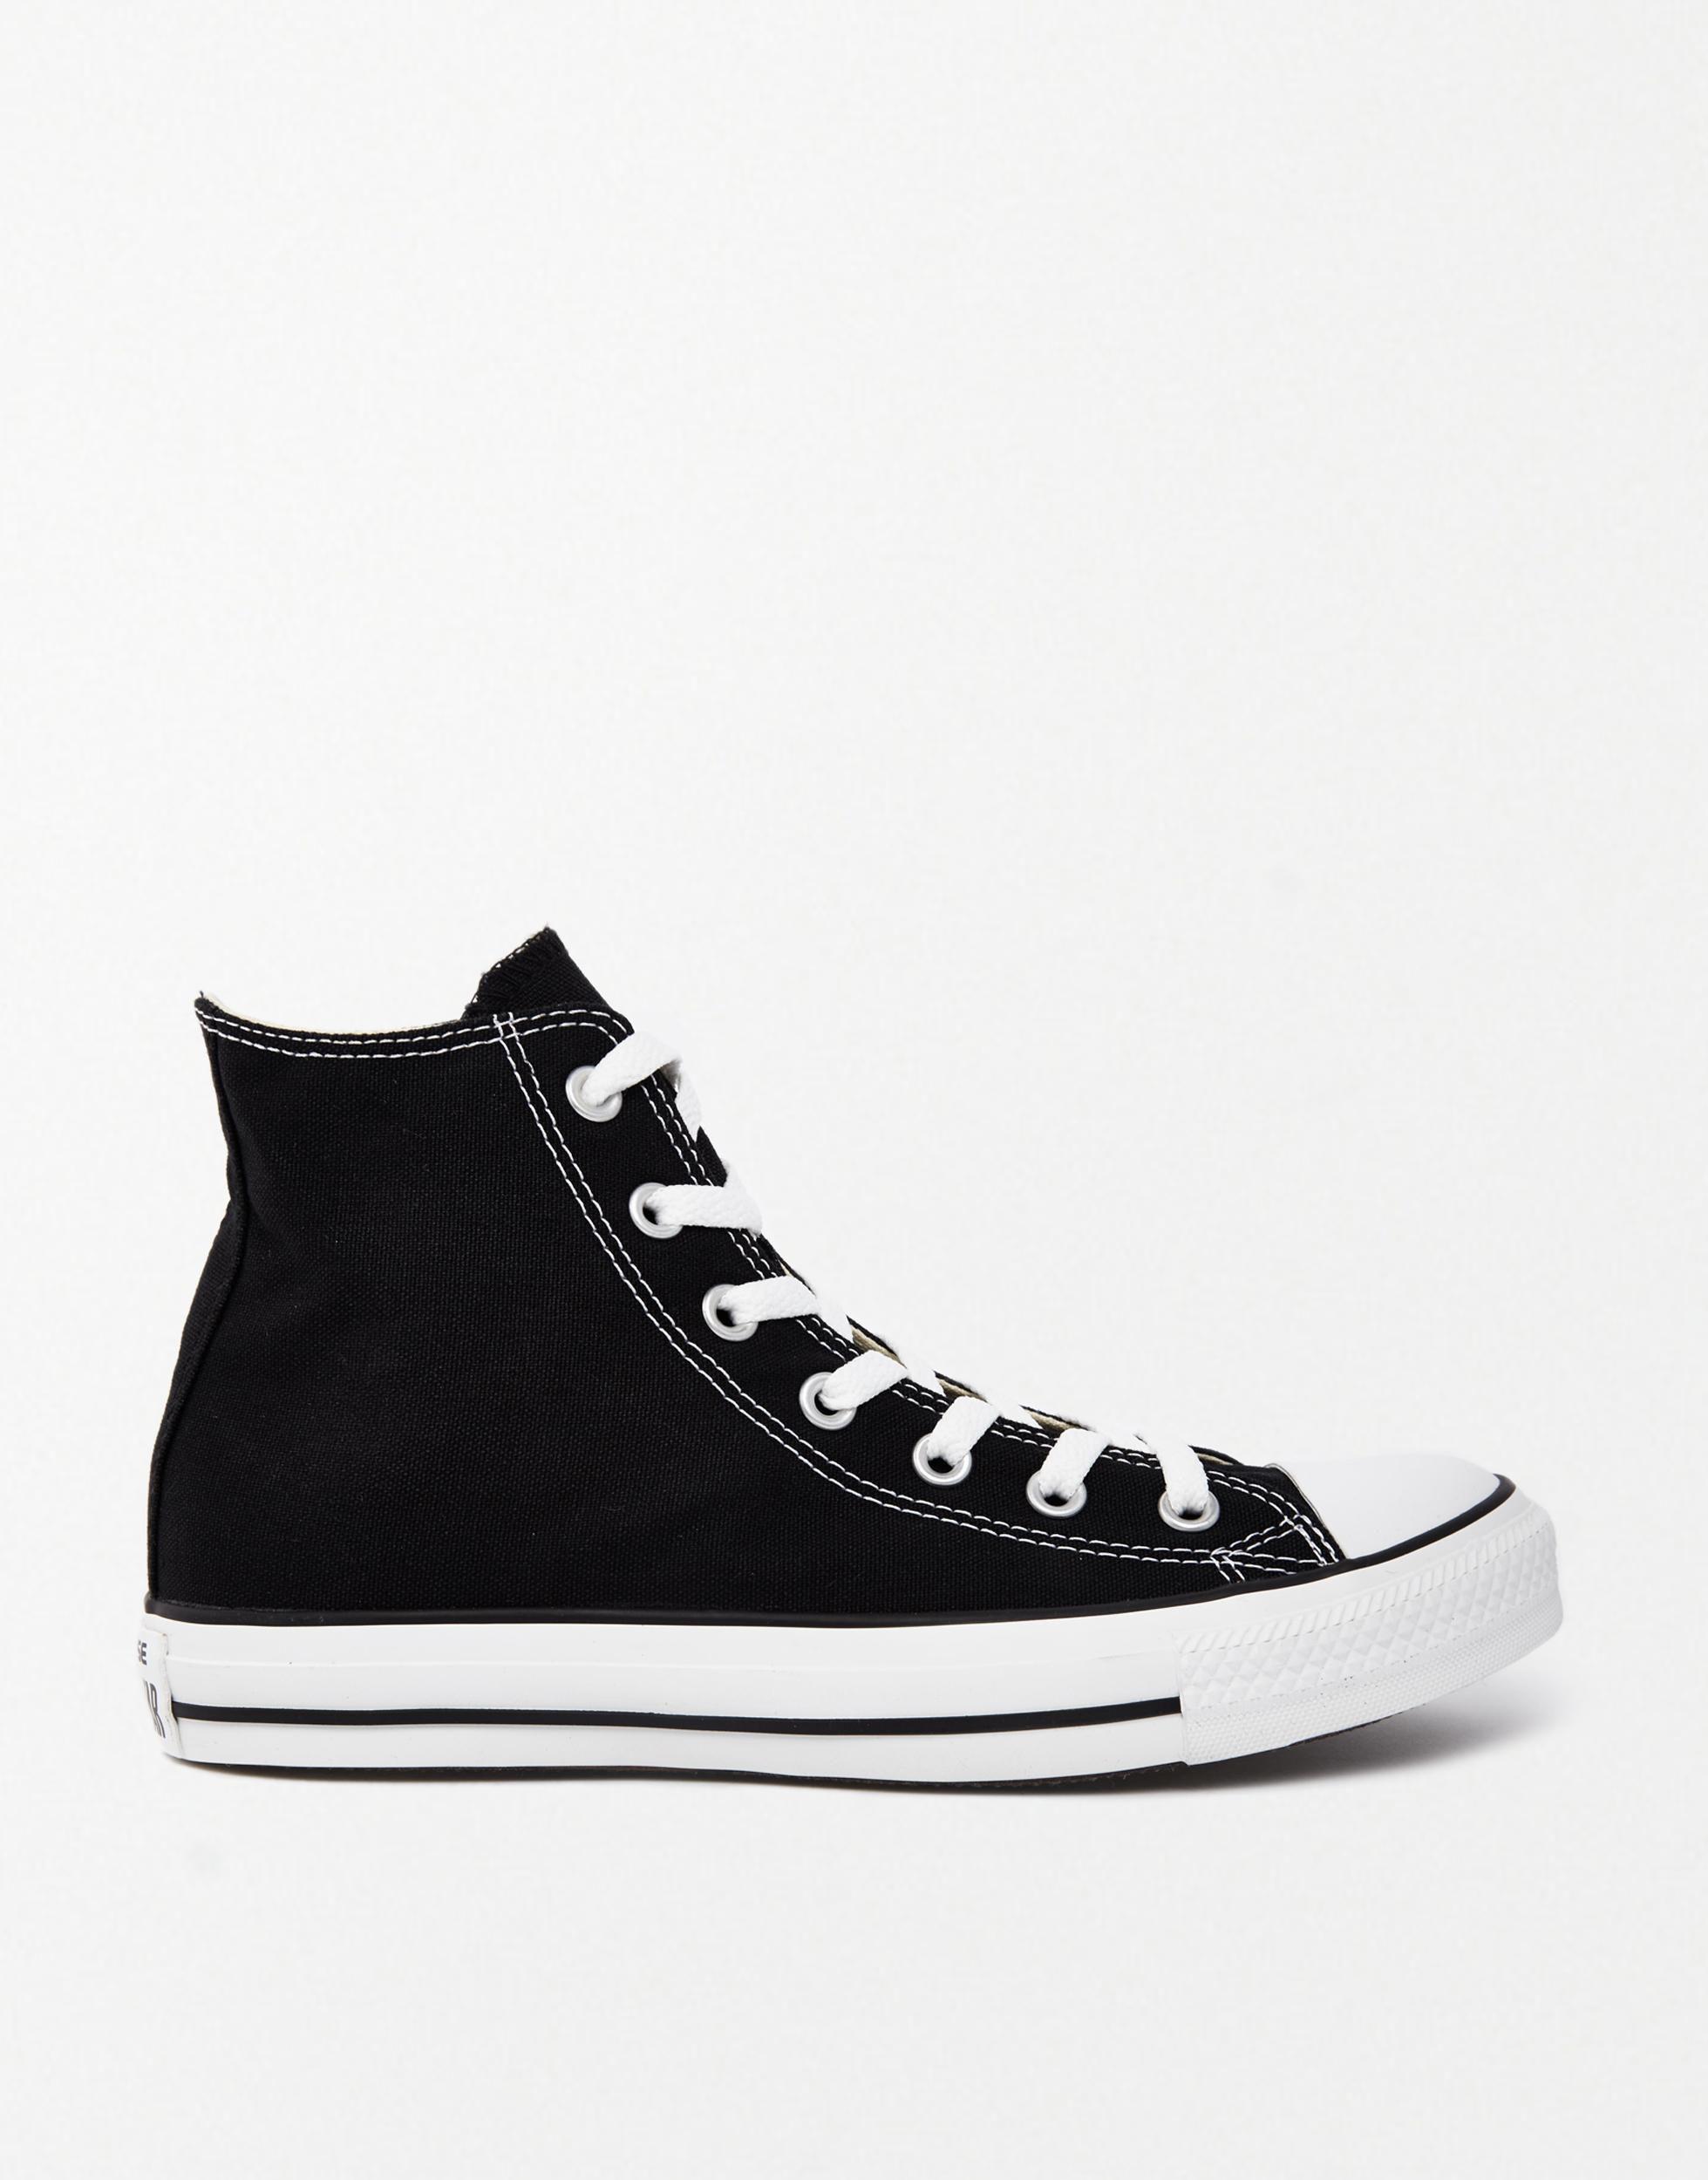 Converse All Star High Top Black Trainers | Lyst